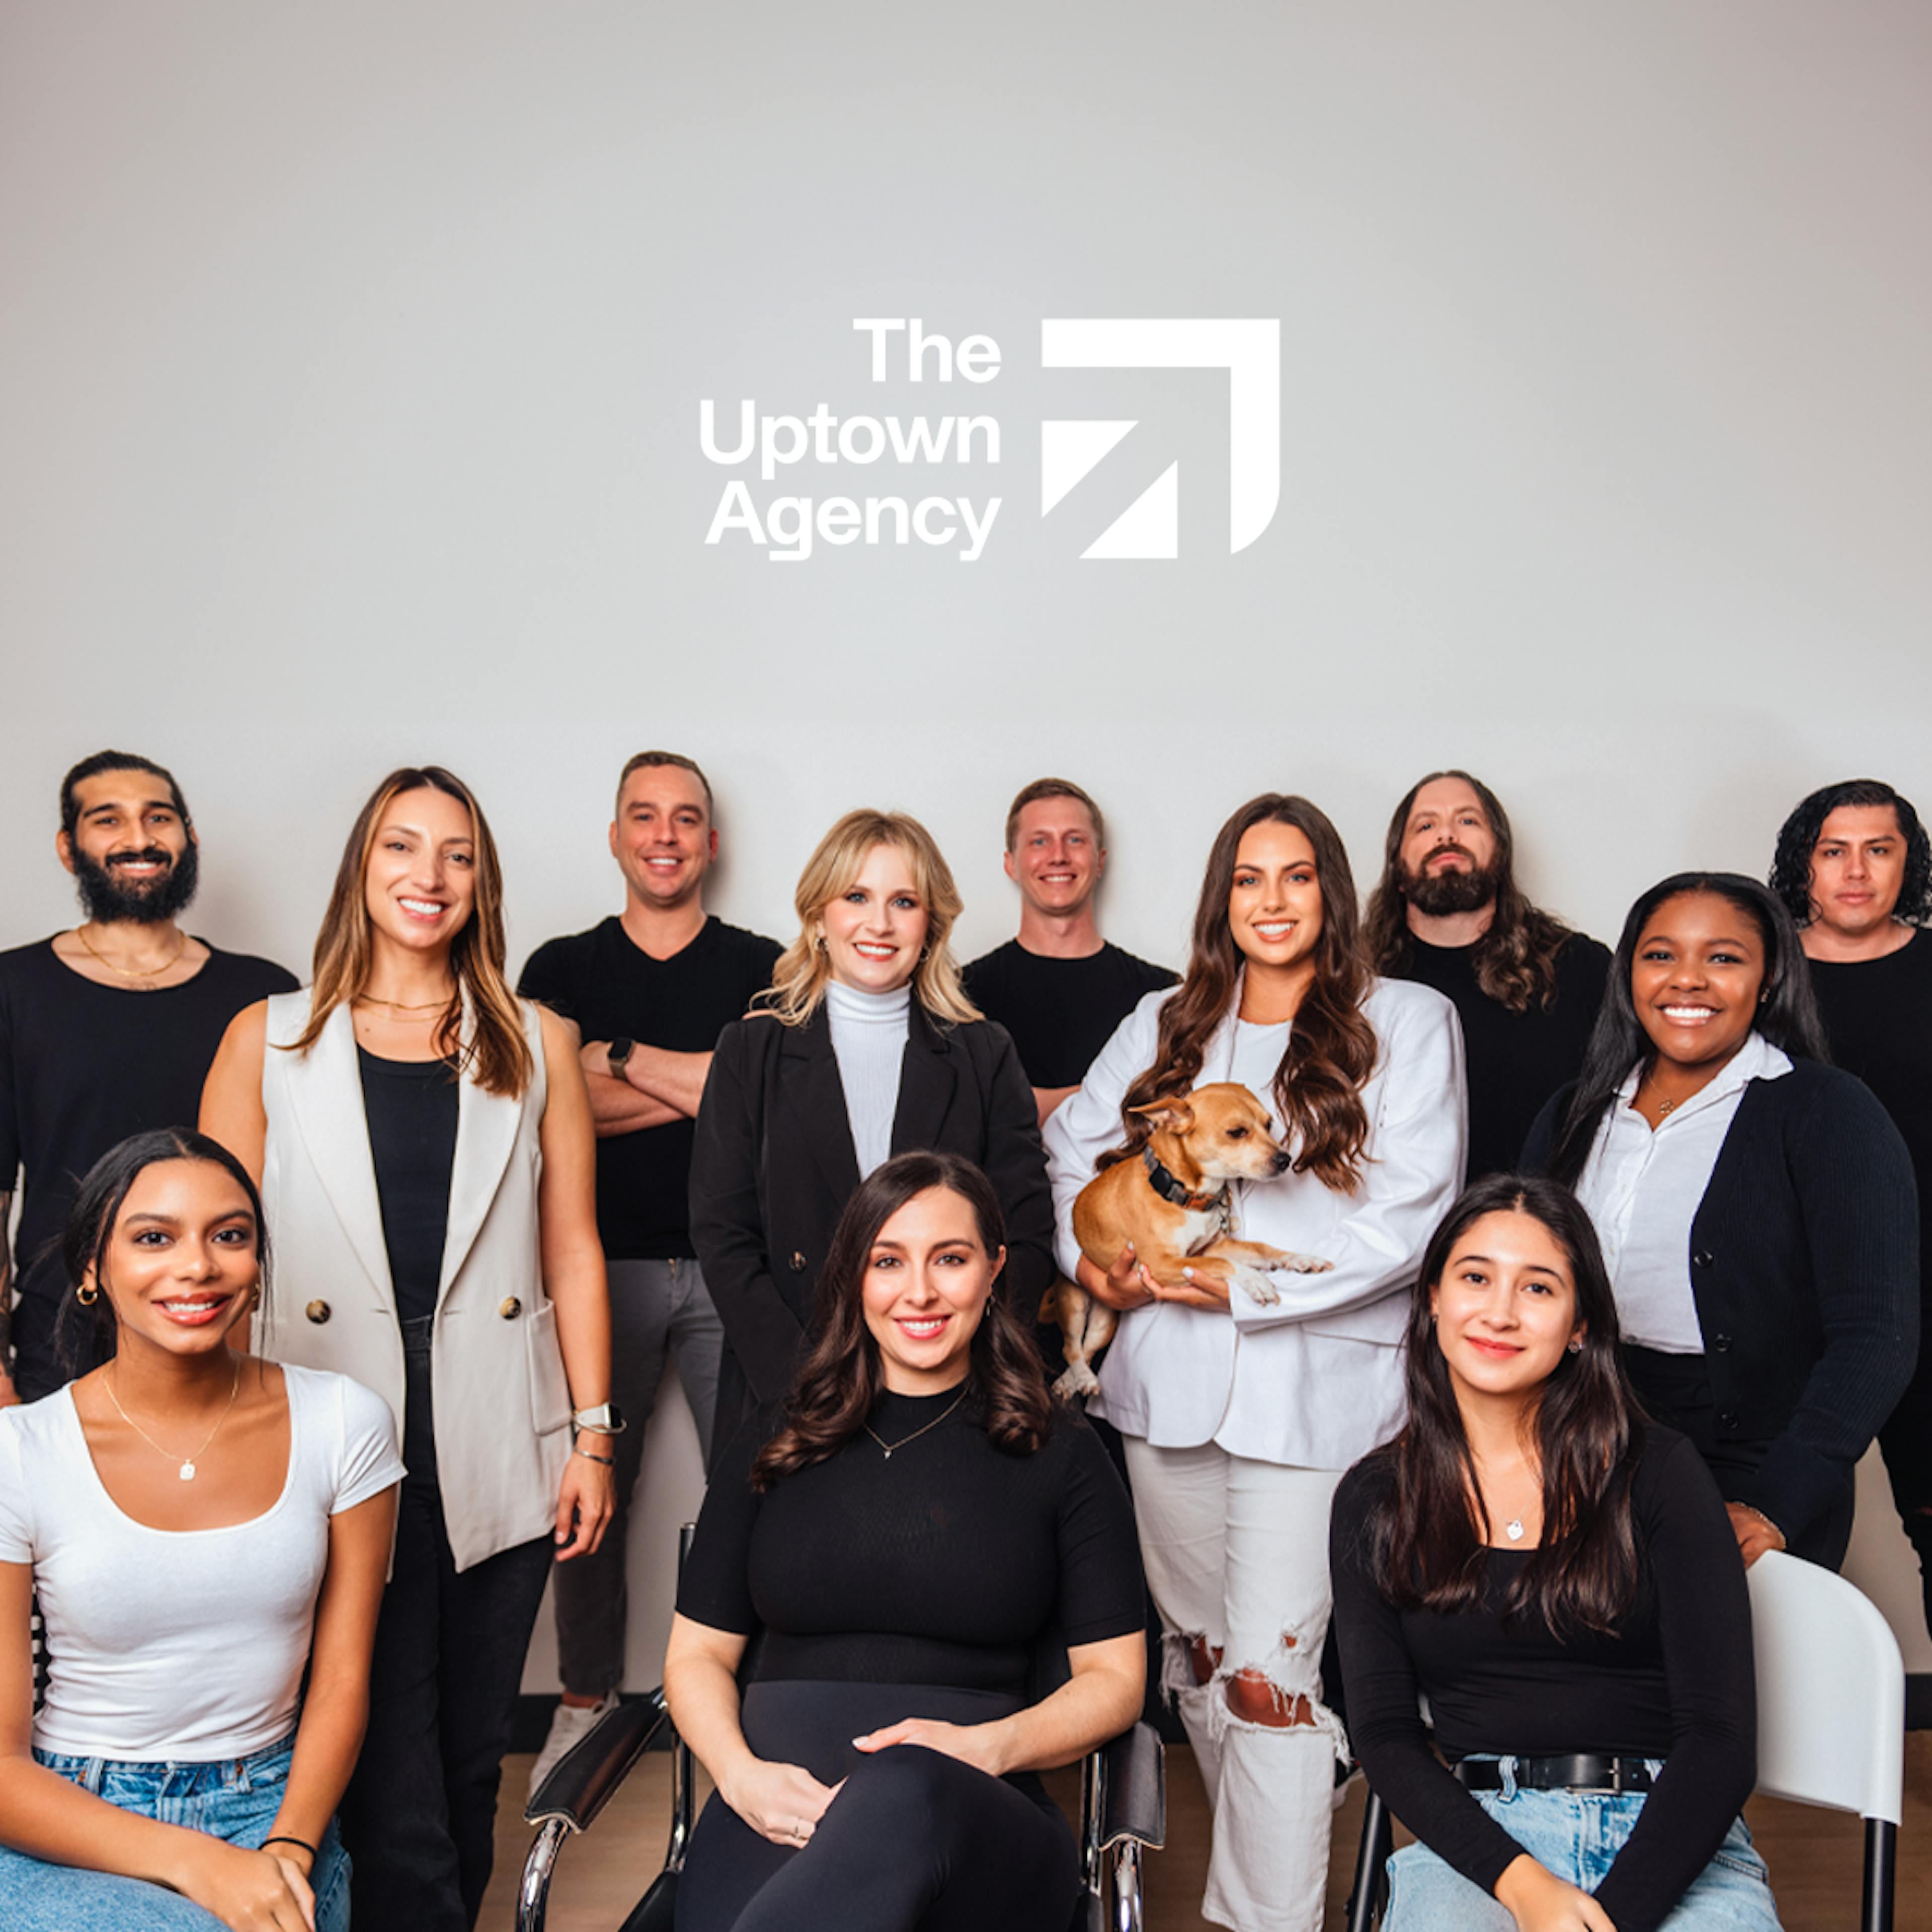 The Uptown Agency Acquires RBA, an Inc 5000 Company